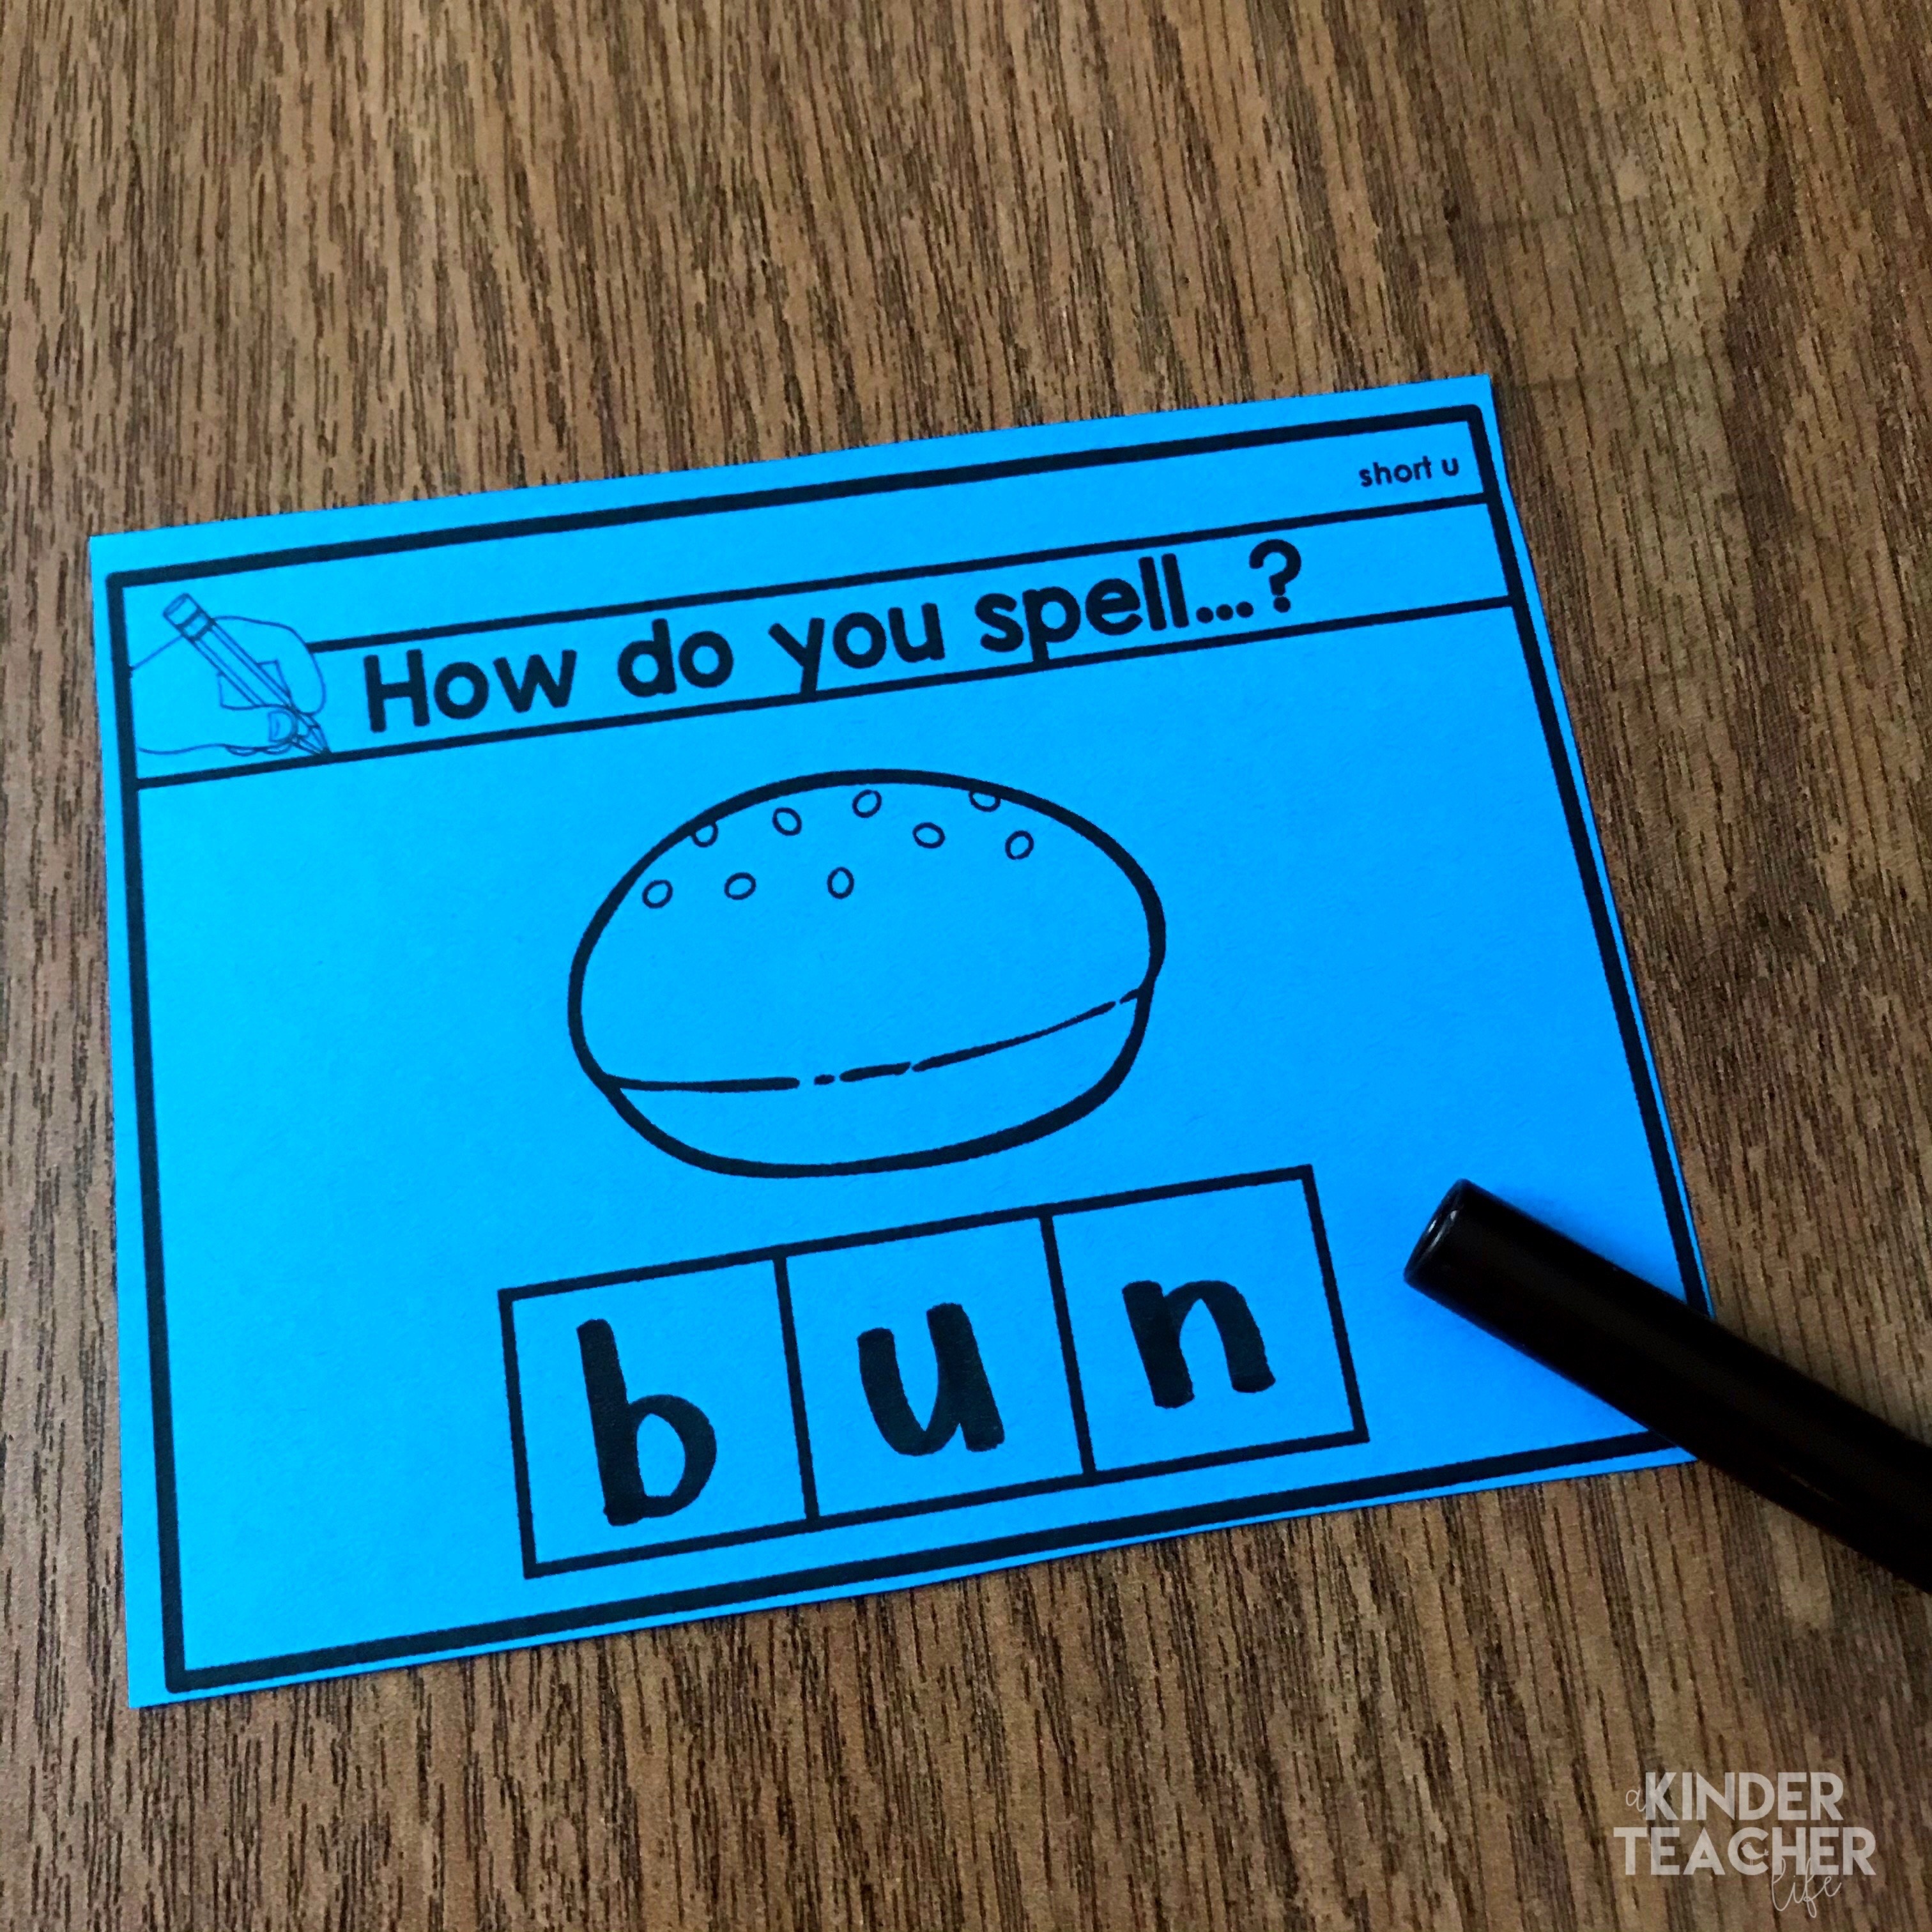 Sound boxes are a great tool to help students to practice writing sounds they hear in the correct sequence. Read this blog post to learn how you could incorporate Sound Boxes into your guided reading instruction! 